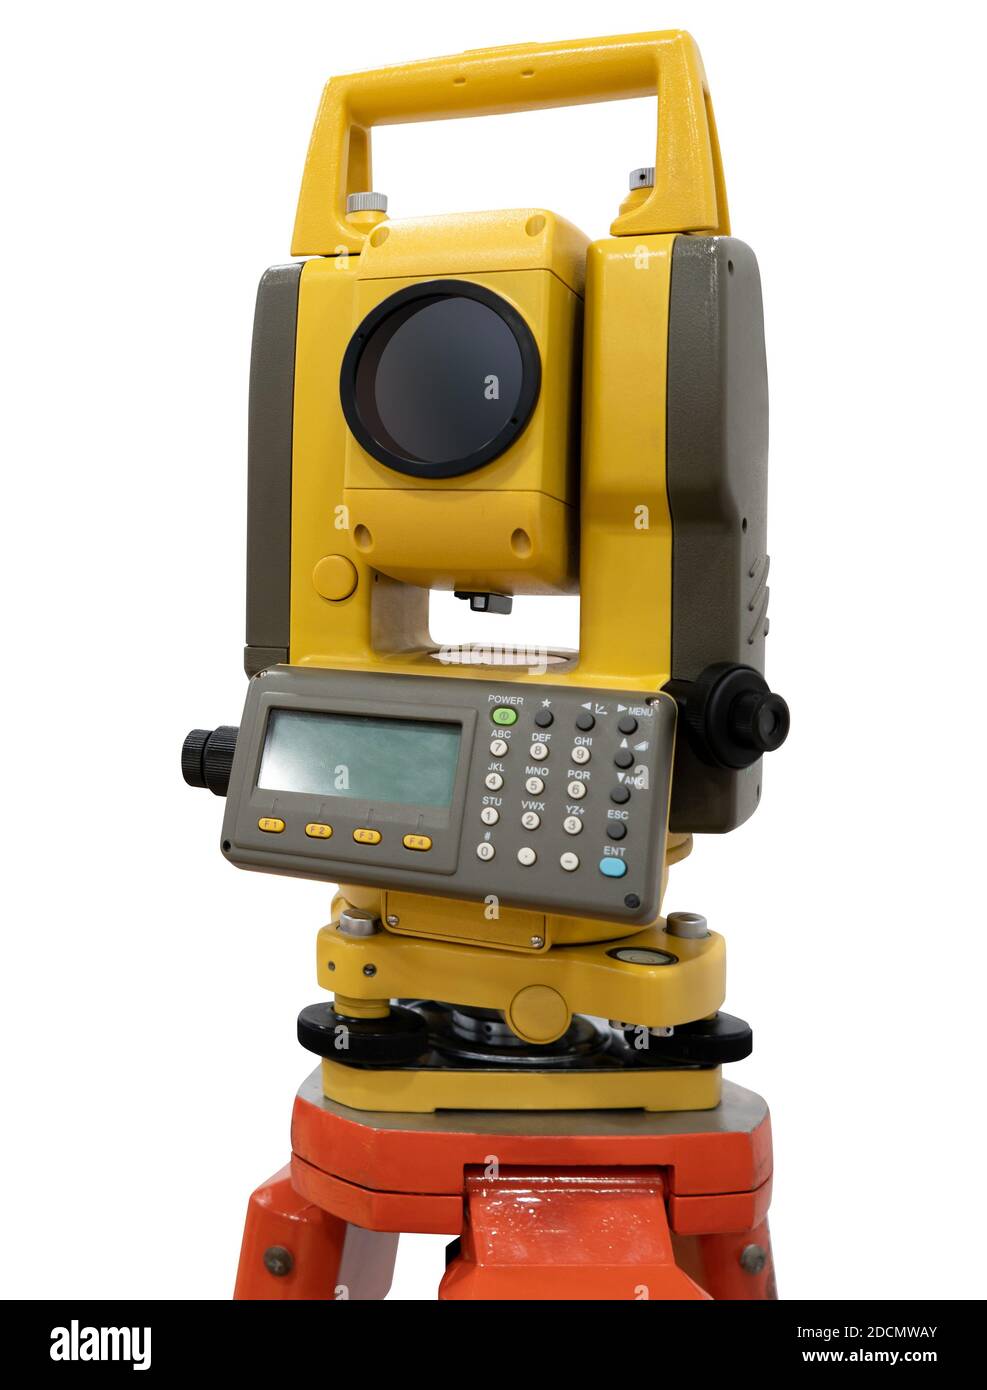 Theodolite, total positioning station, isolated on white on a background Stock Photo